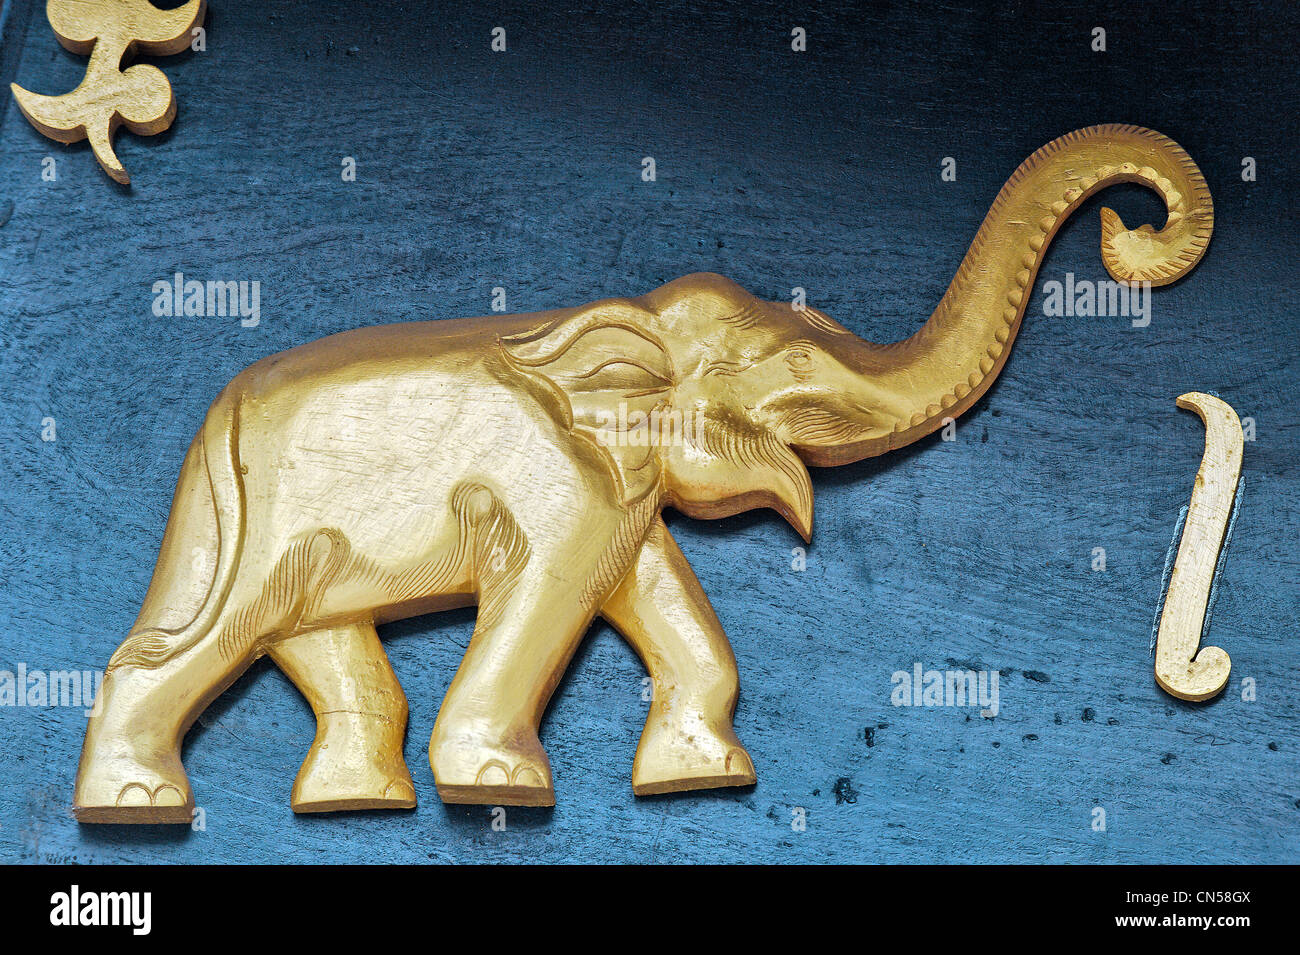 Laos, Luang Prabang Province, Luang Prabang City, listed as World Heritage by UNESCO, golden elephant sculpture Stock Photo